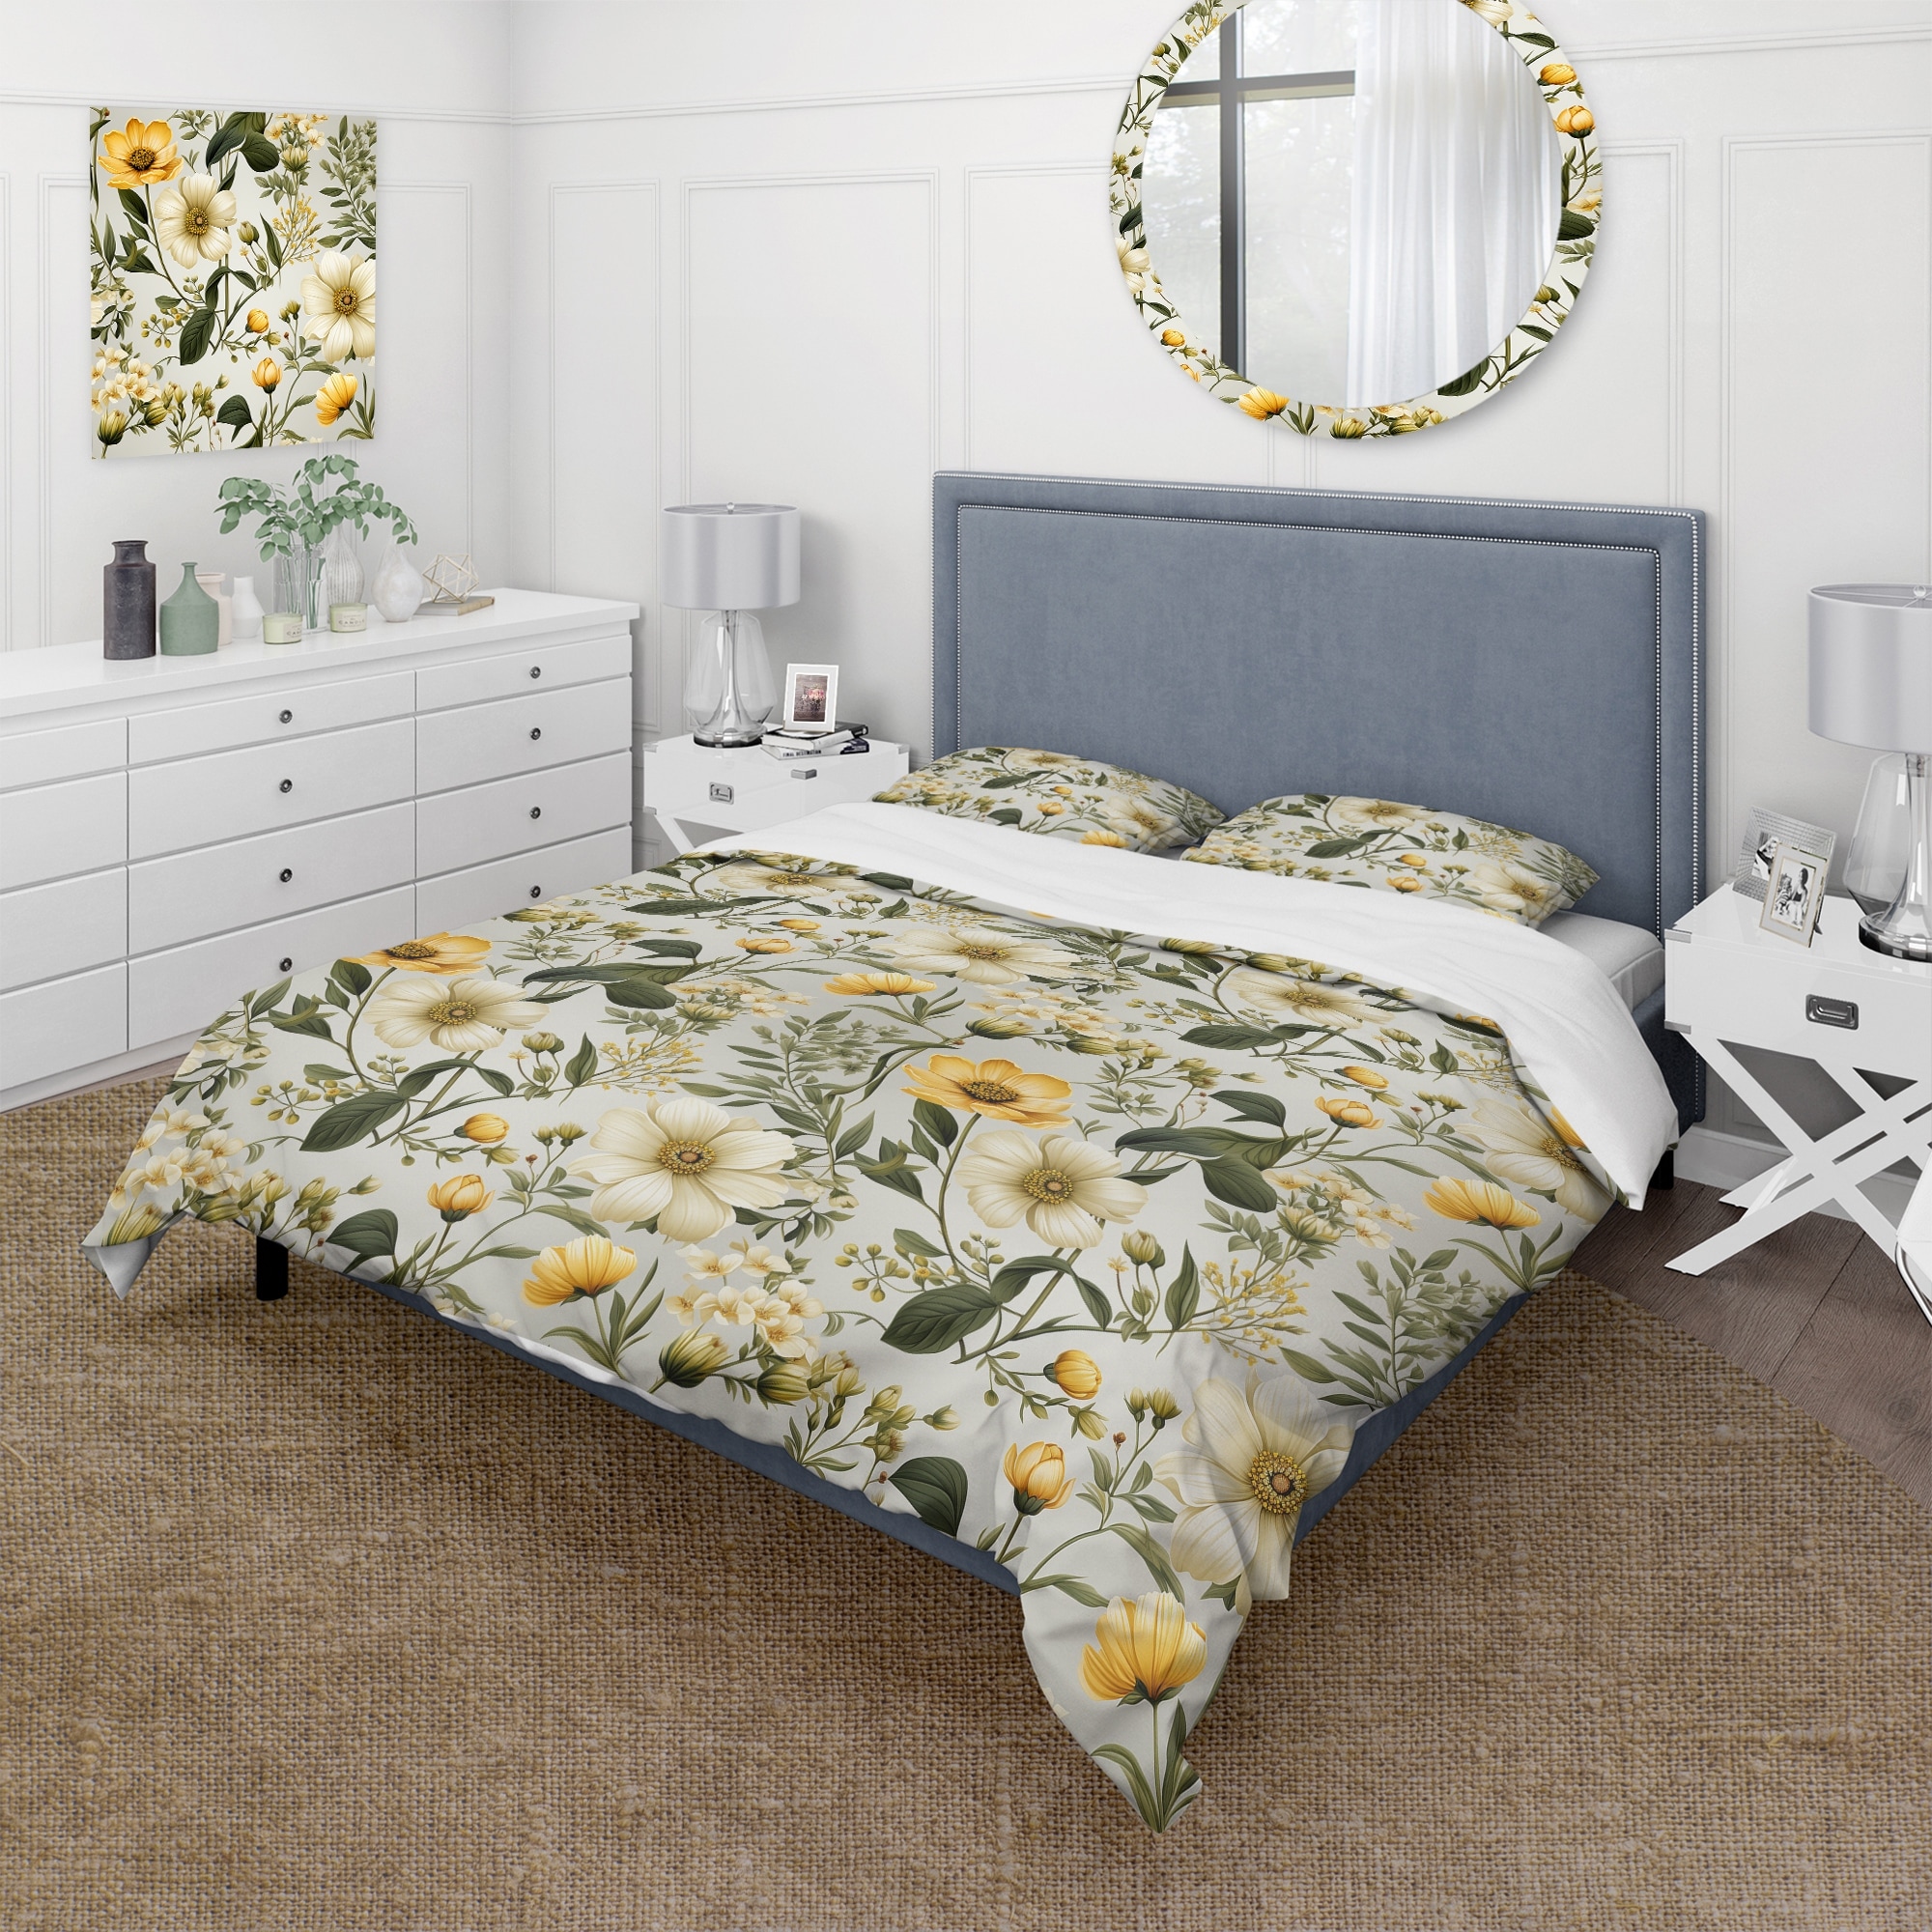  FADFAY Mint Green Floral Duvet Cover Set 100% Cotton Farmhouse  Bedding Elegant Lily Print Botanical Bed Cover Countryside Girl Bedding 3  Piece King/Cal King(106x92) : Home & Kitchen